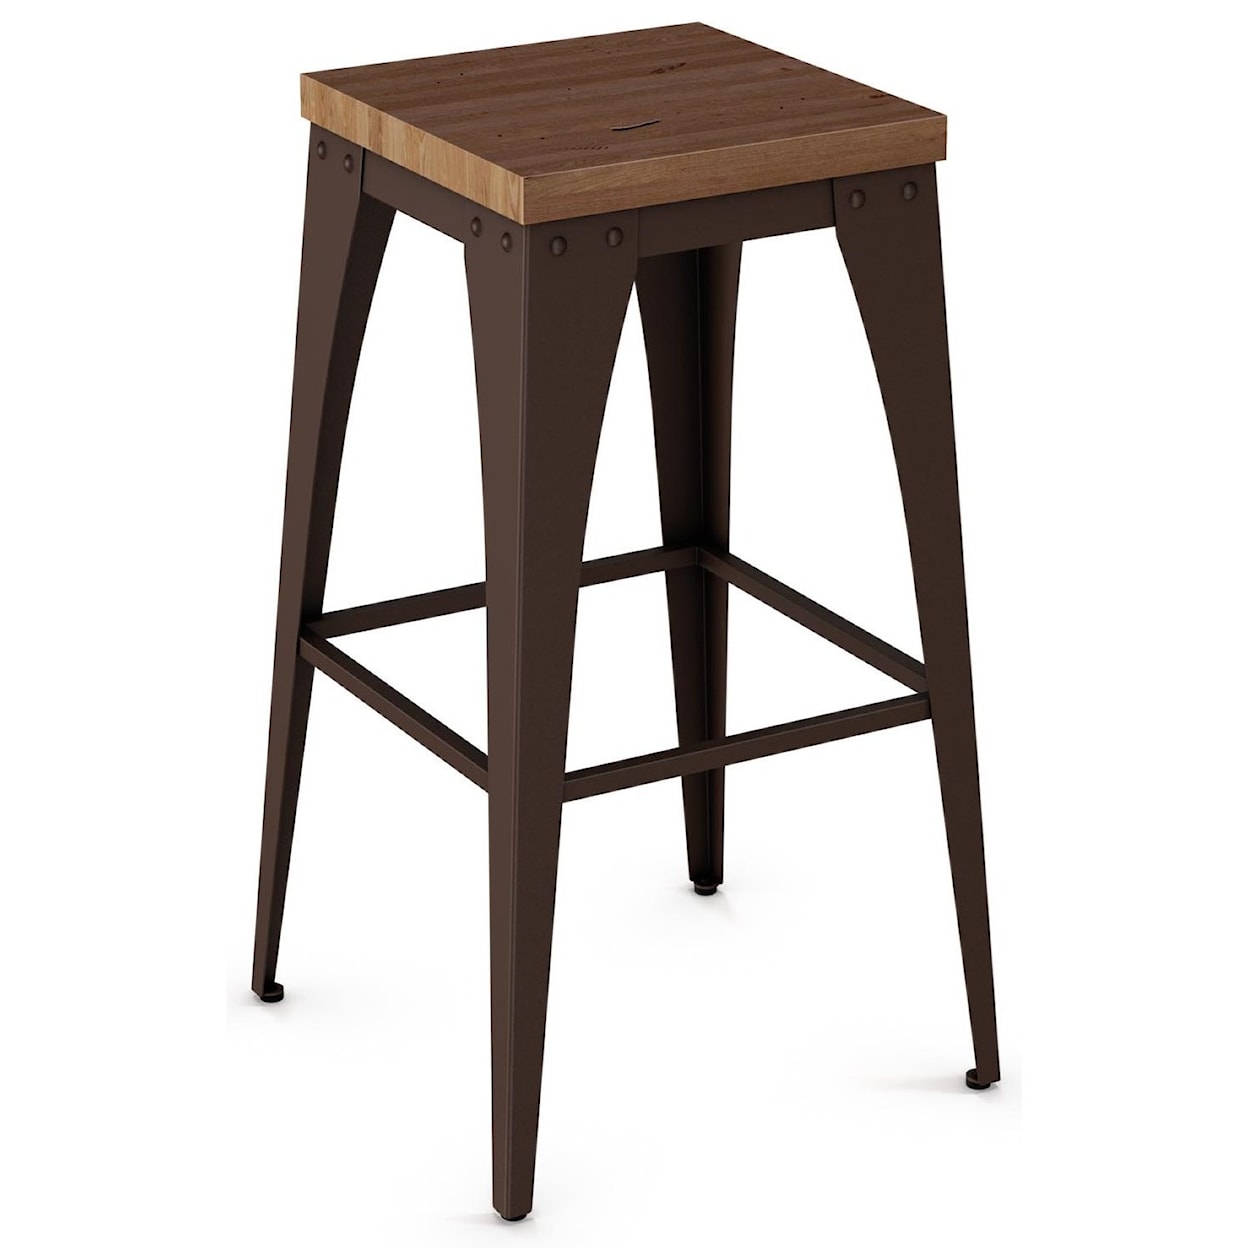 Amisco Industrial 30" Upright Stool with Wood Seat